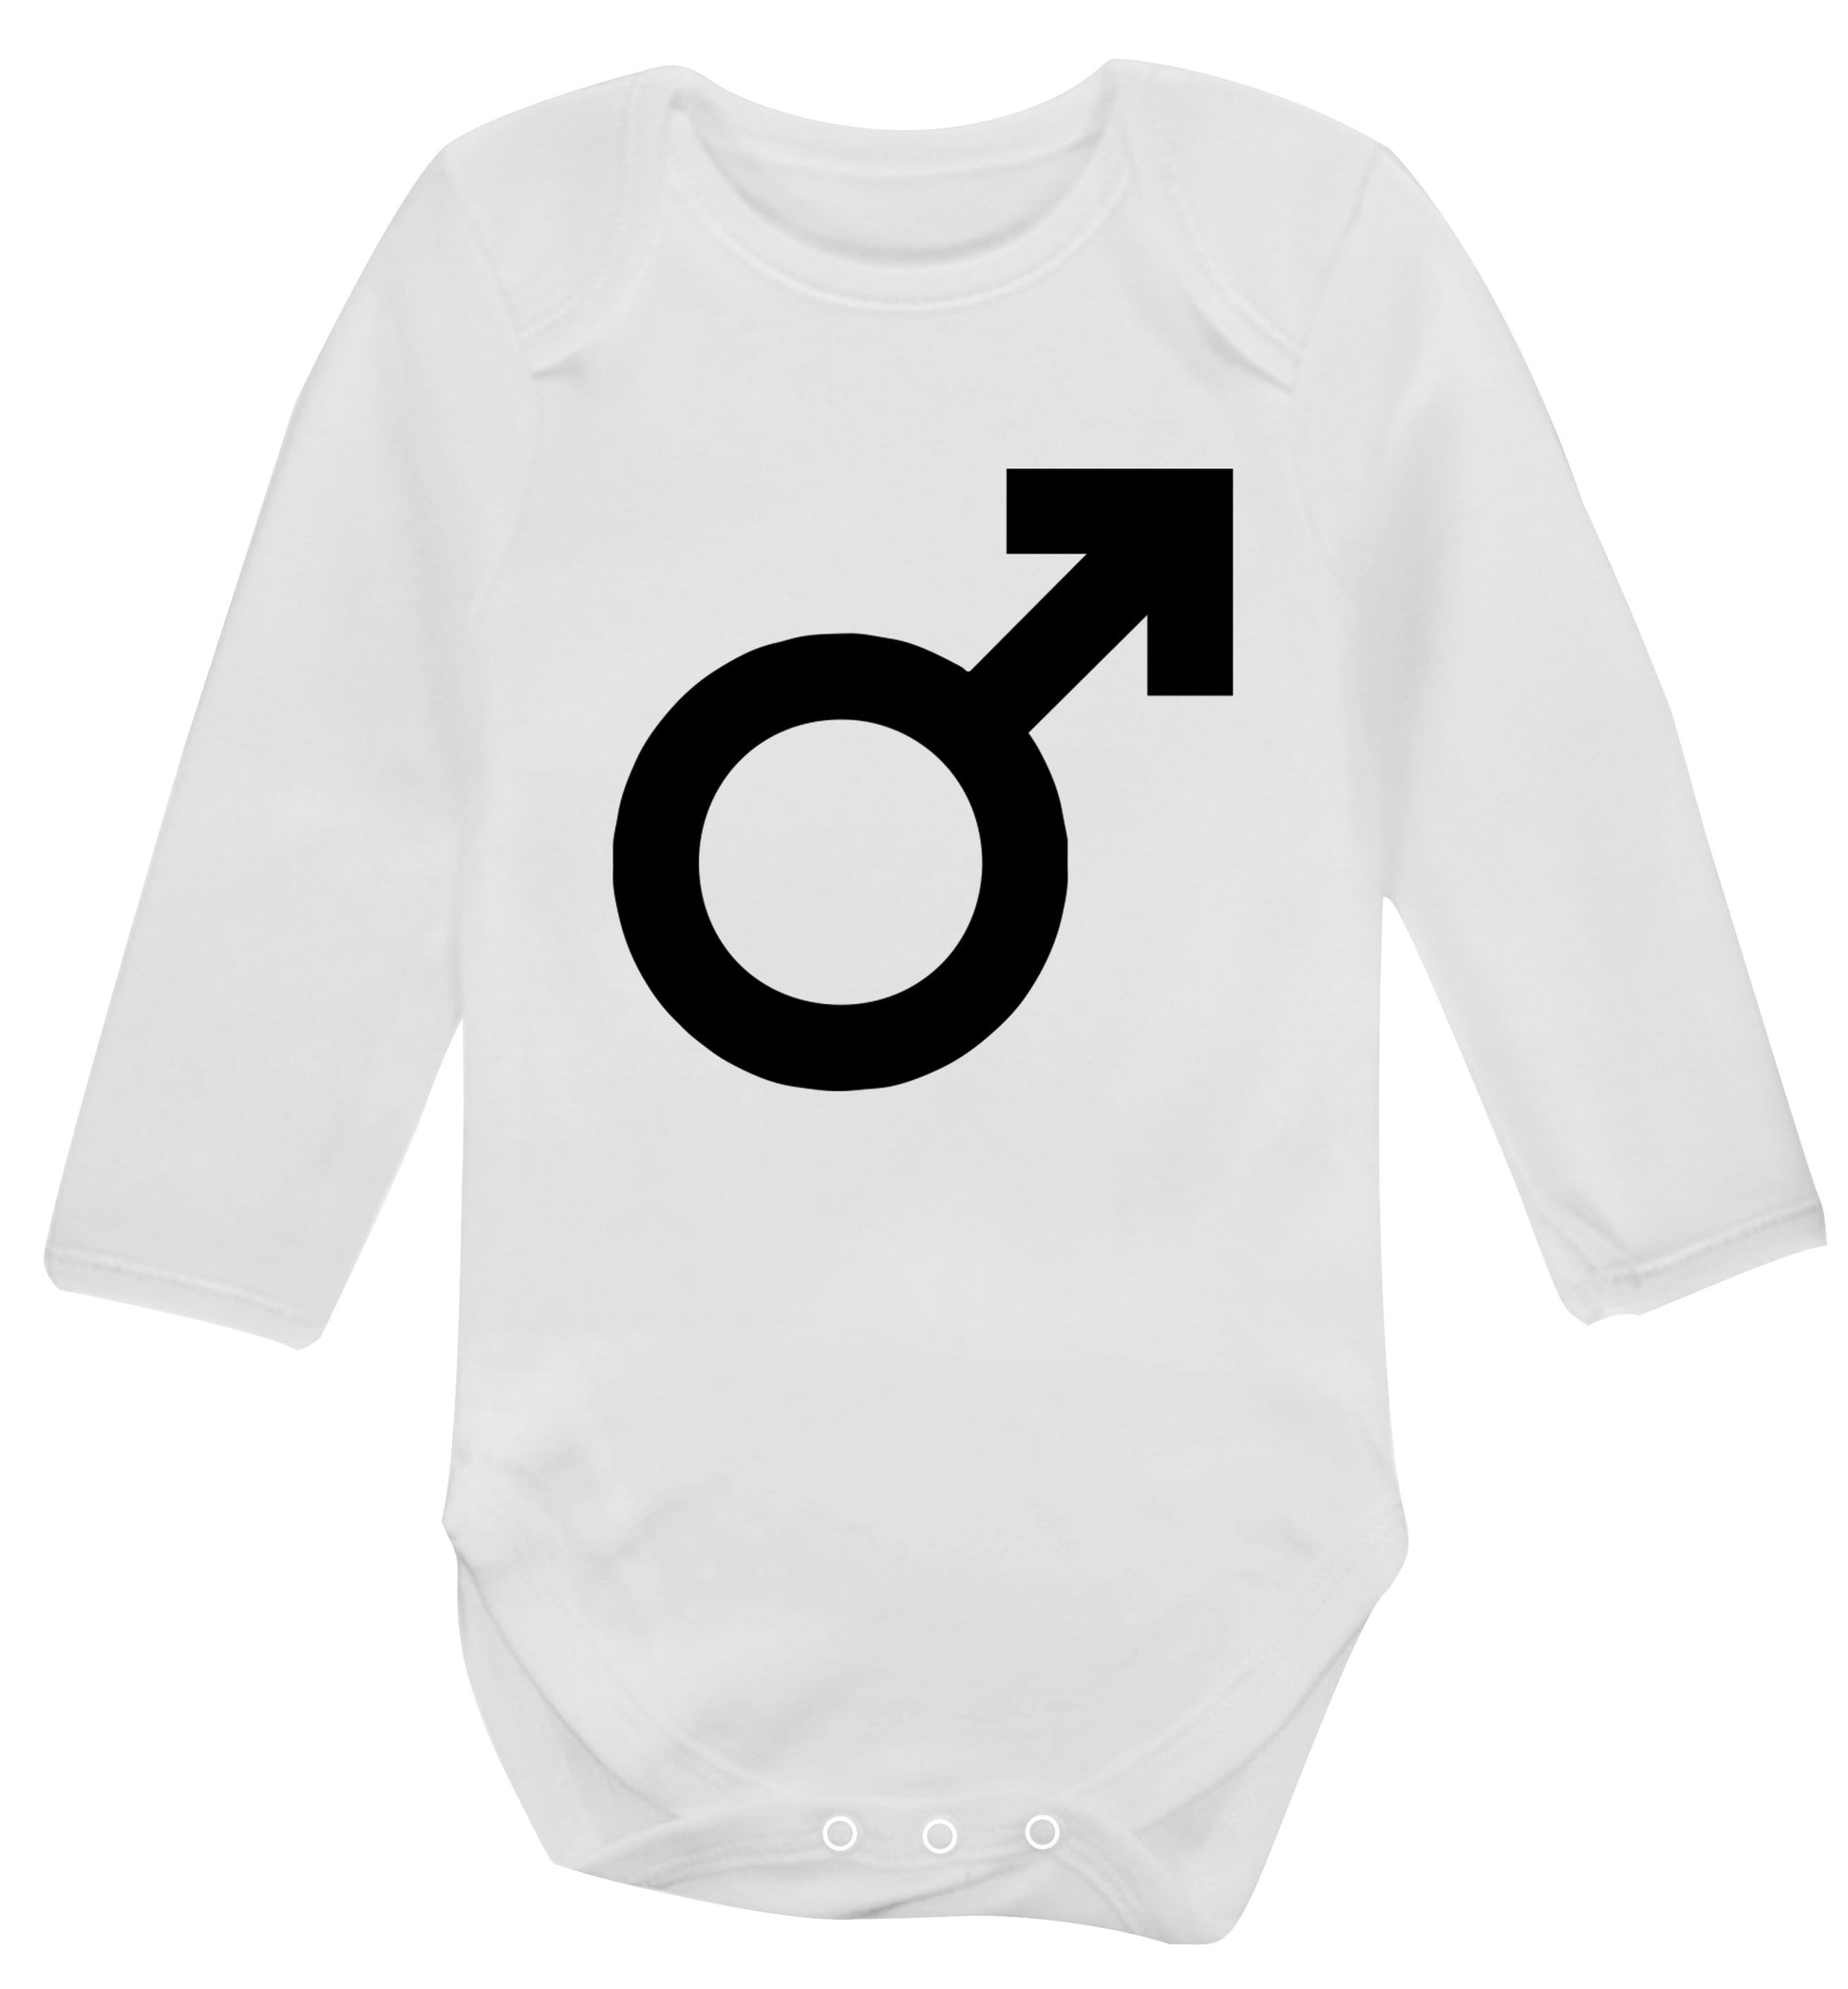 Male symbol large Baby Vest long sleeved white 6-12 months